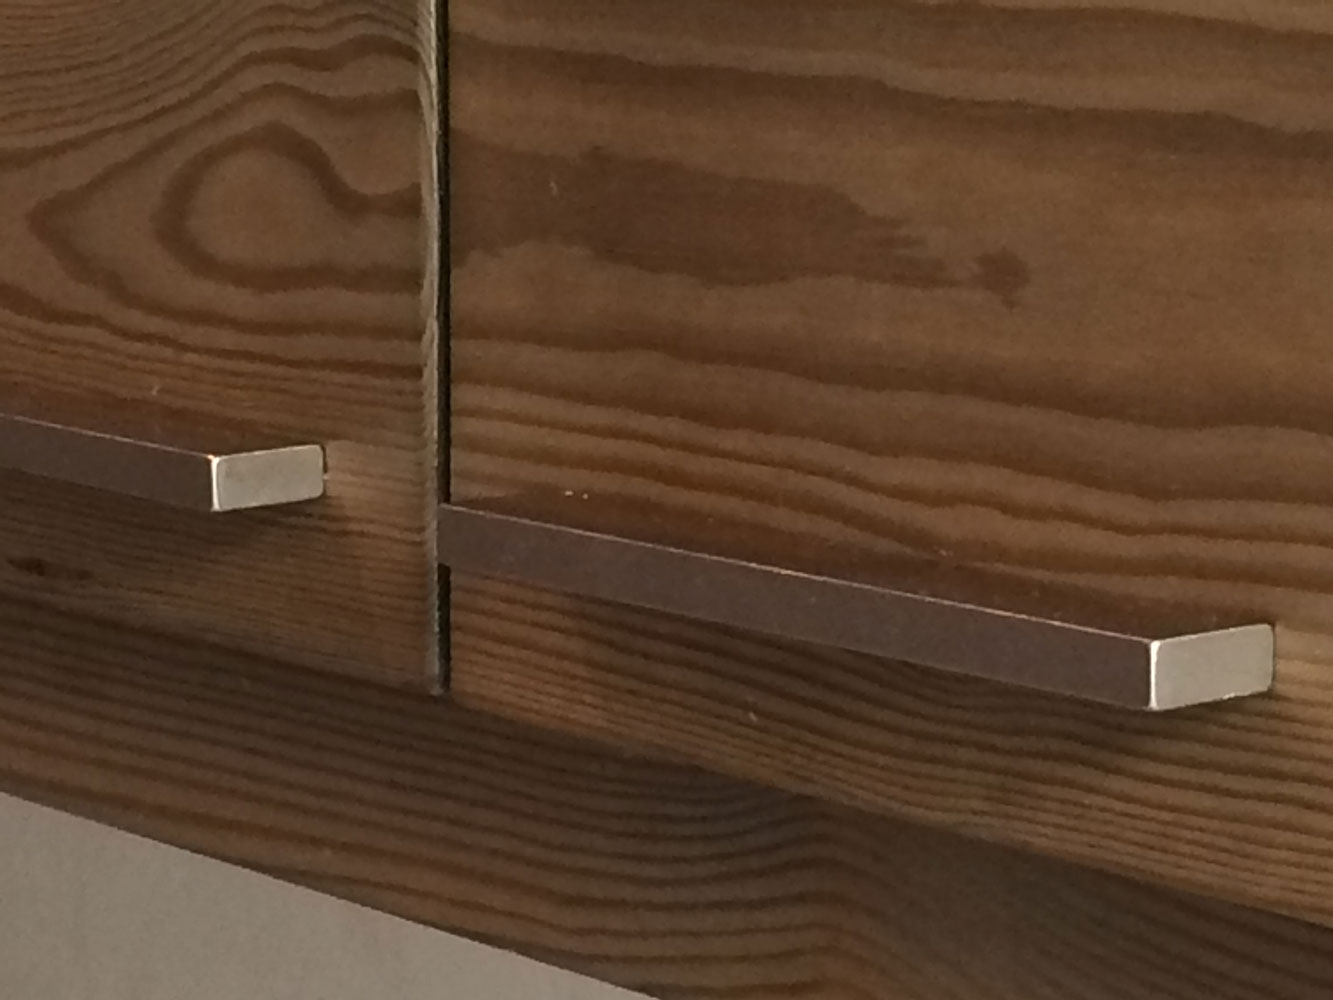 brushed steel handles on aged wood kitchen